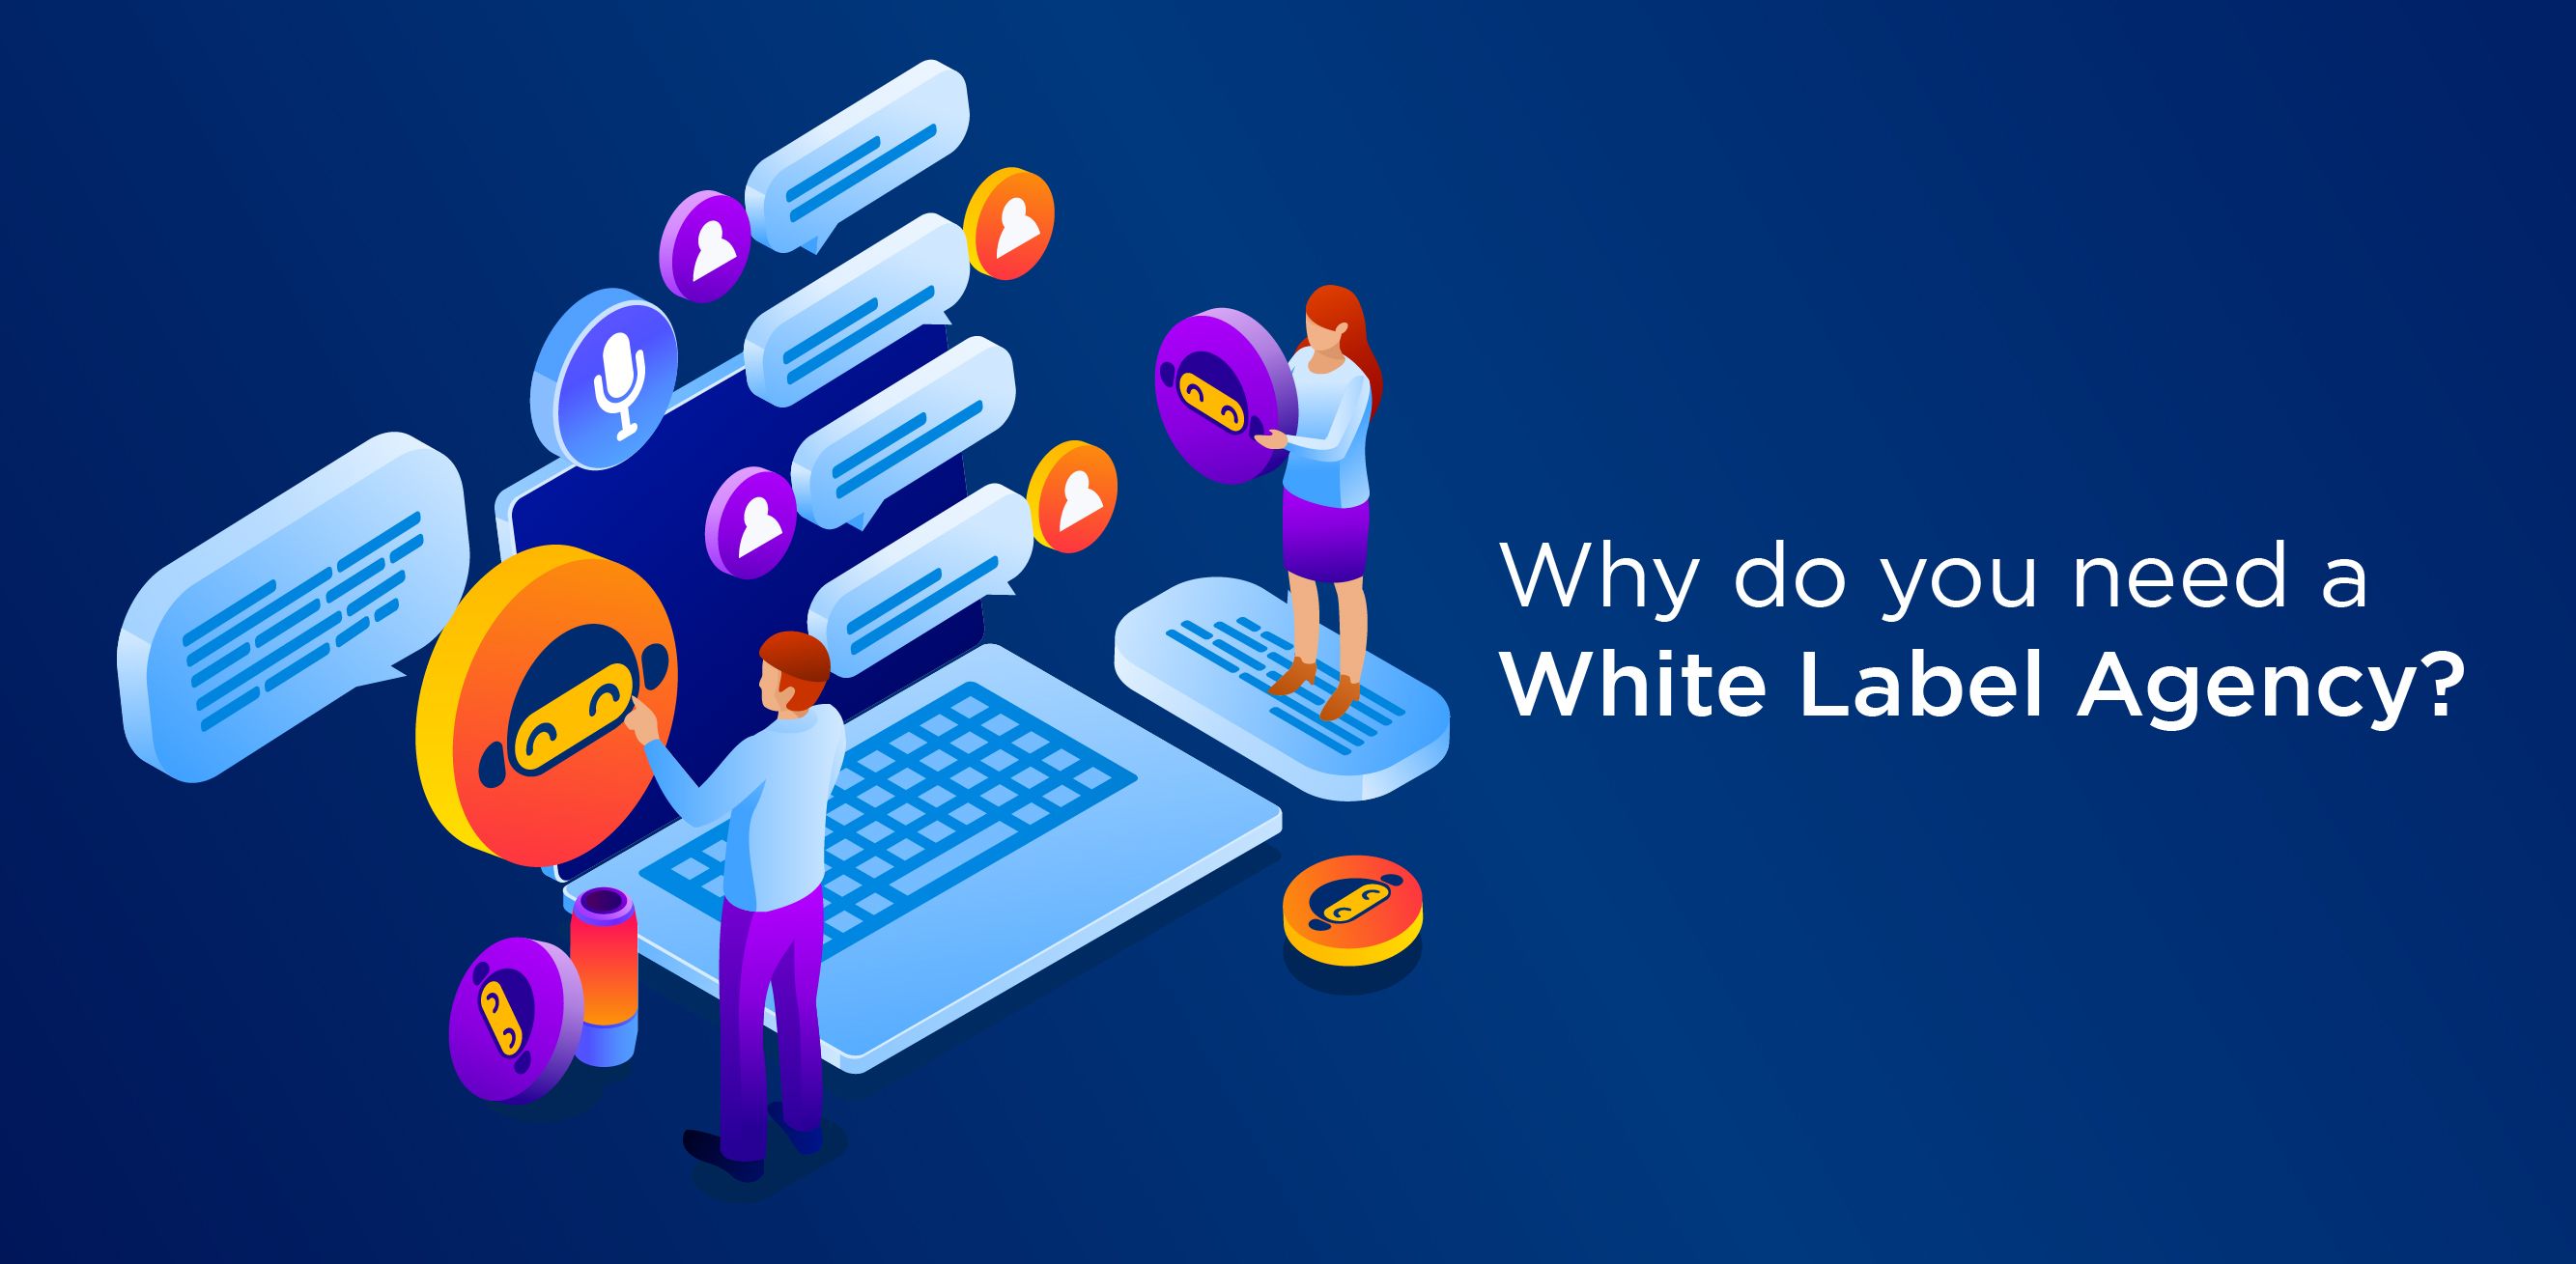 Why do you need a White Label Agency